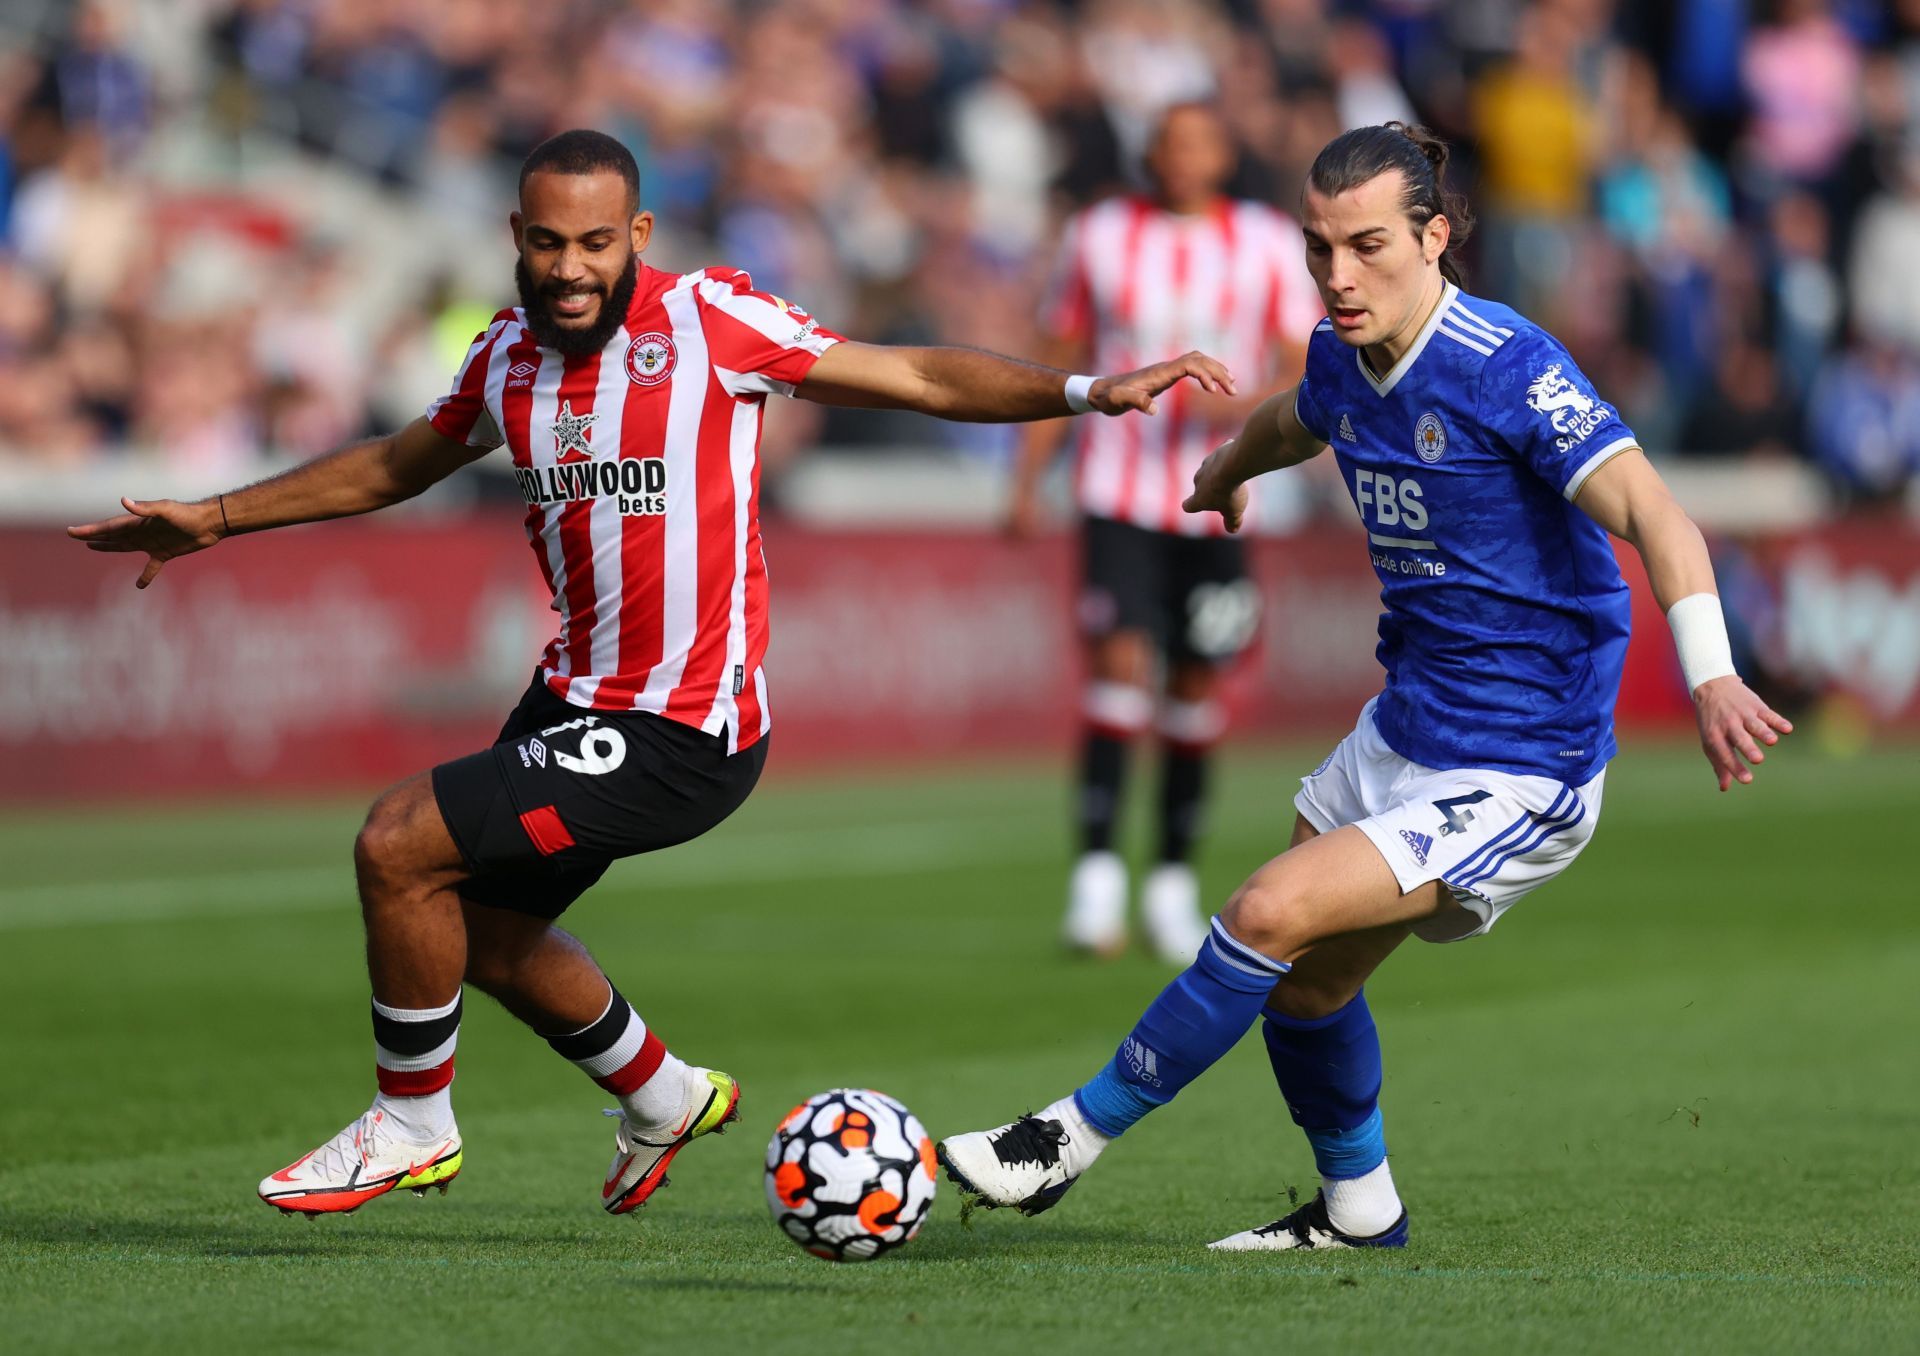 Brentford will take on Leicester City on Sunday.